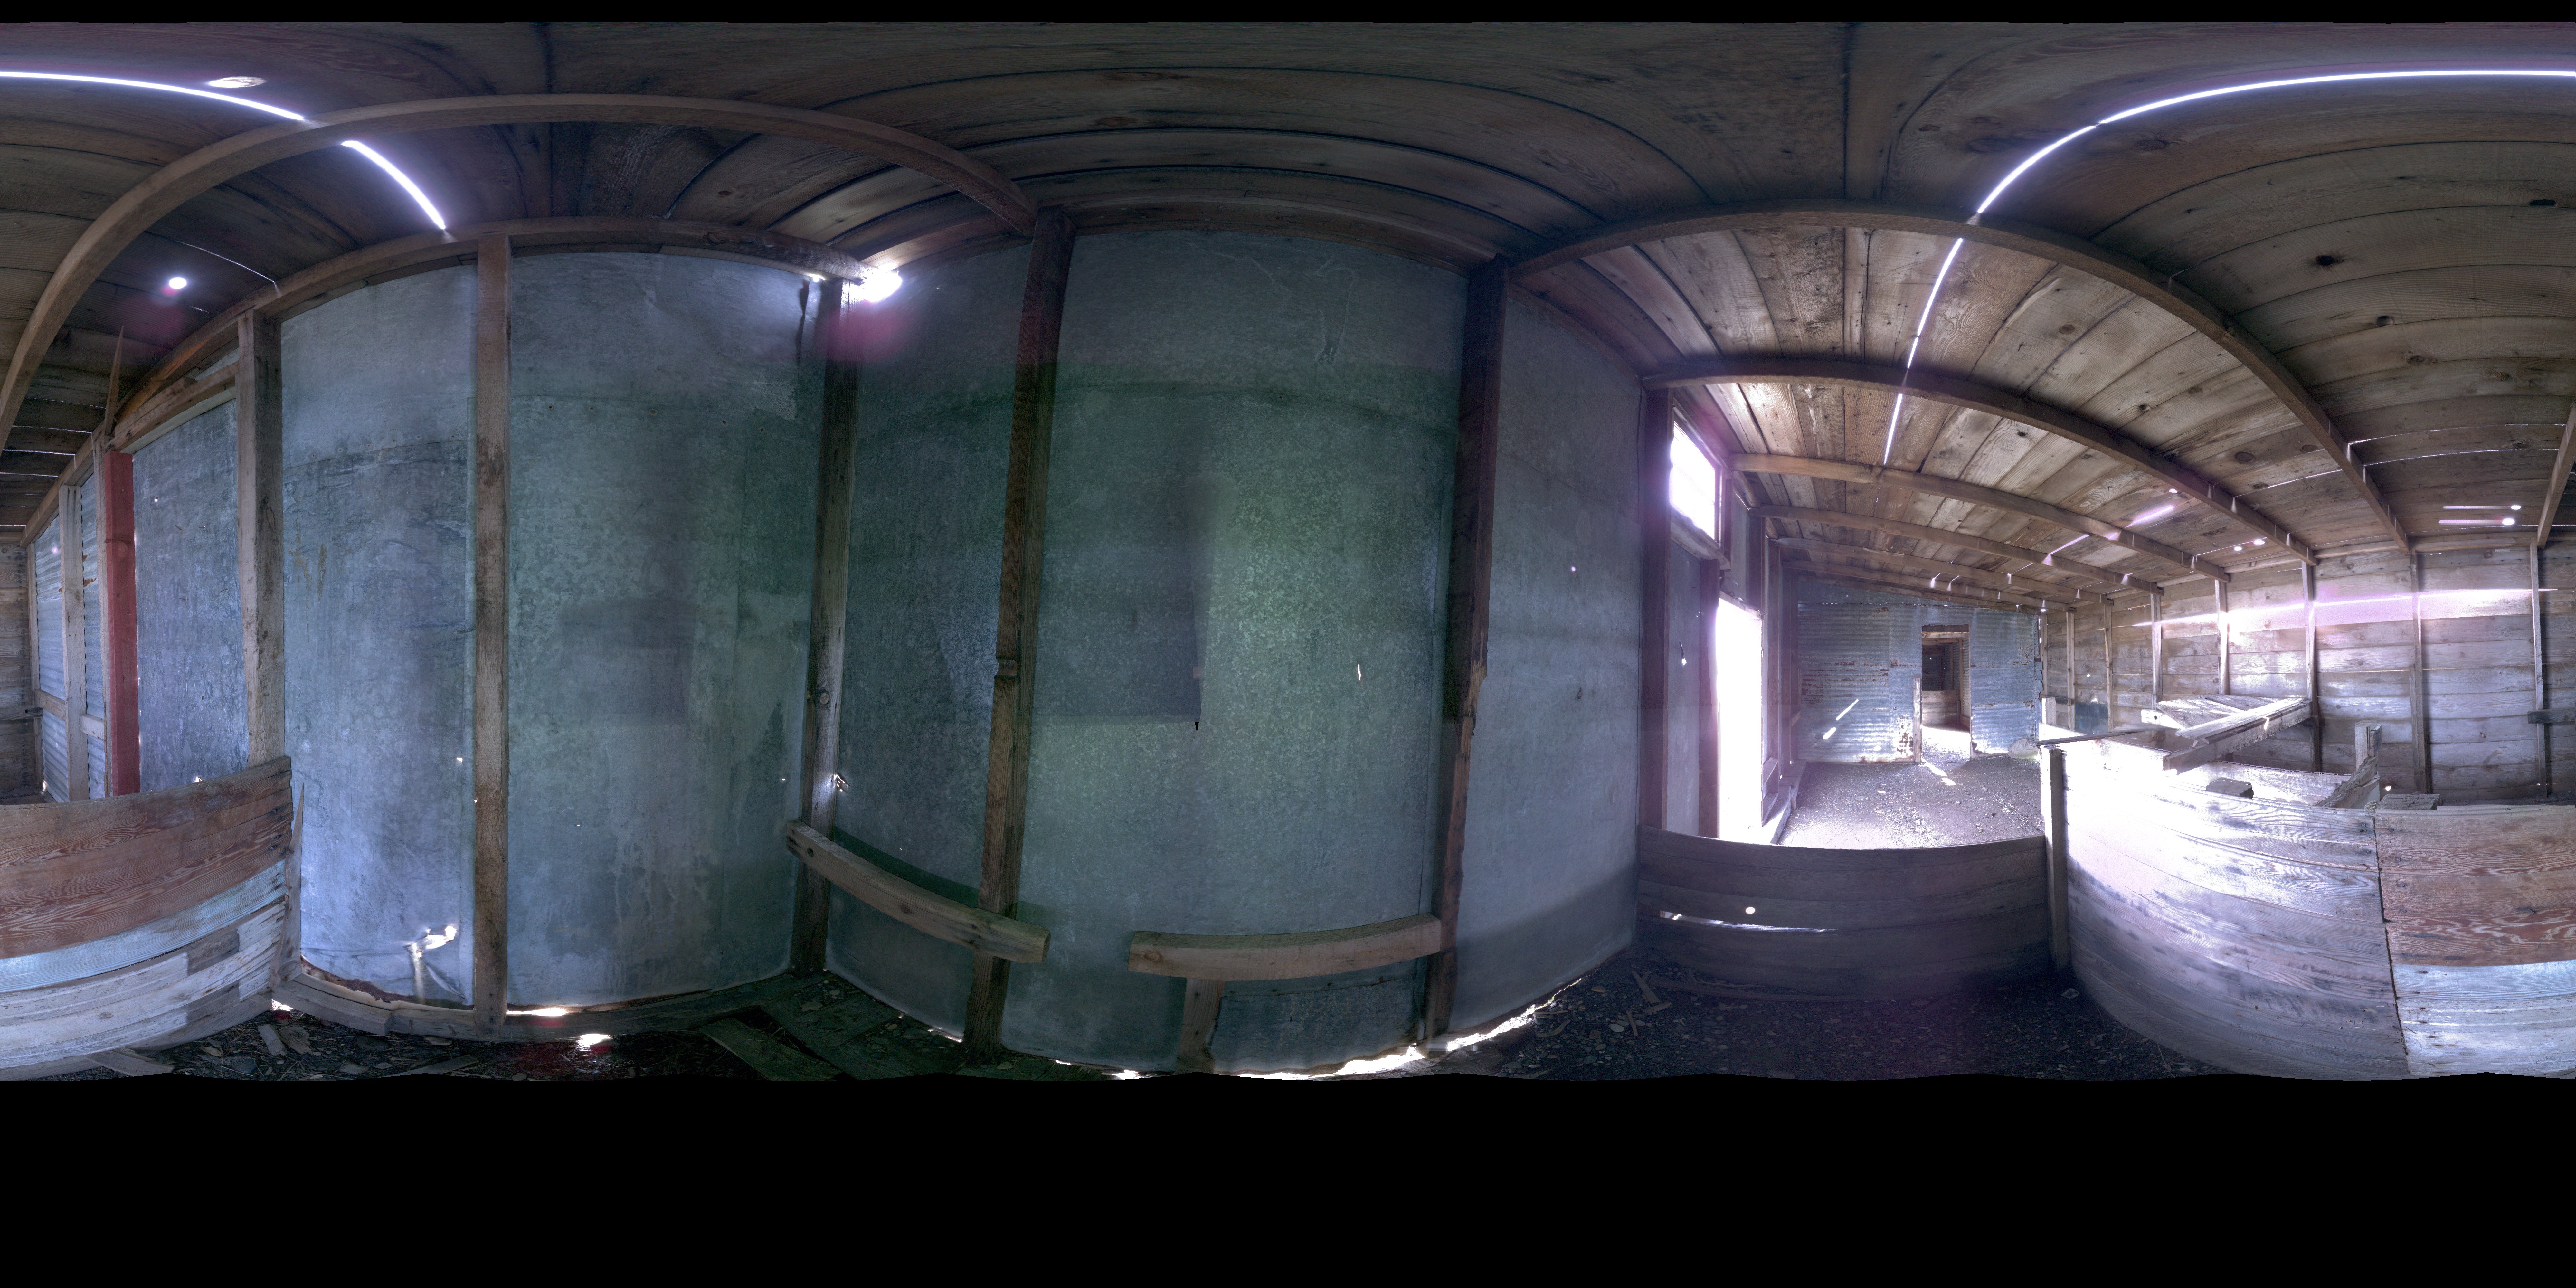 Panoramic view of the RCMP Dog Kennels and Run from the Leica BKL 360, scanning location 2.